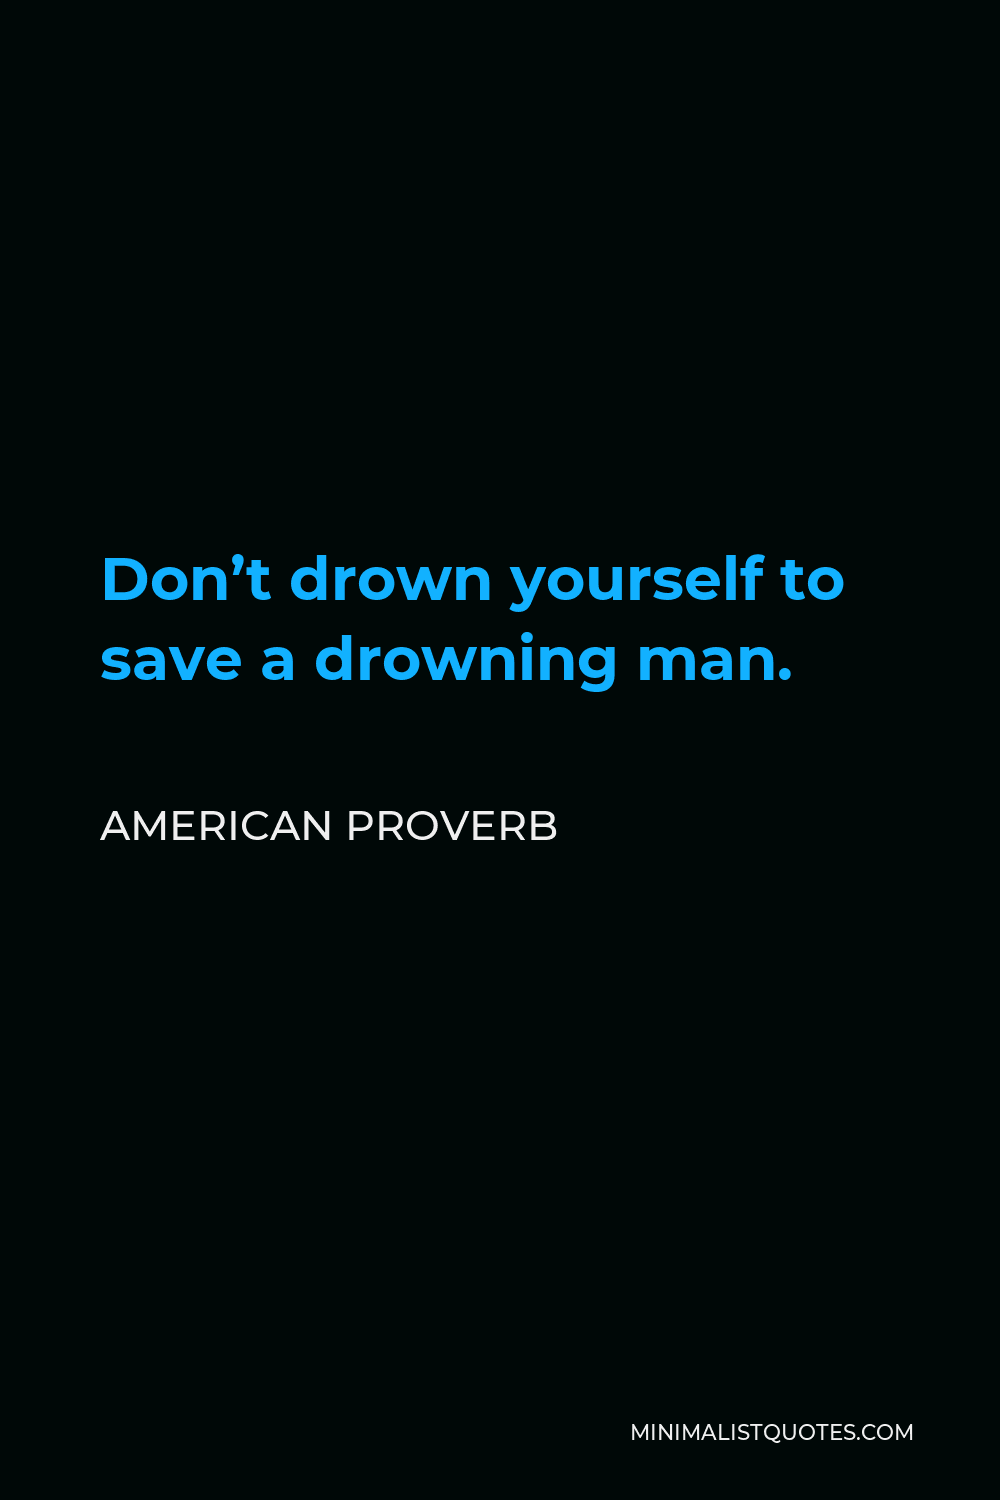 American Proverb Quote - Don’t drown yourself to save a drowning man.